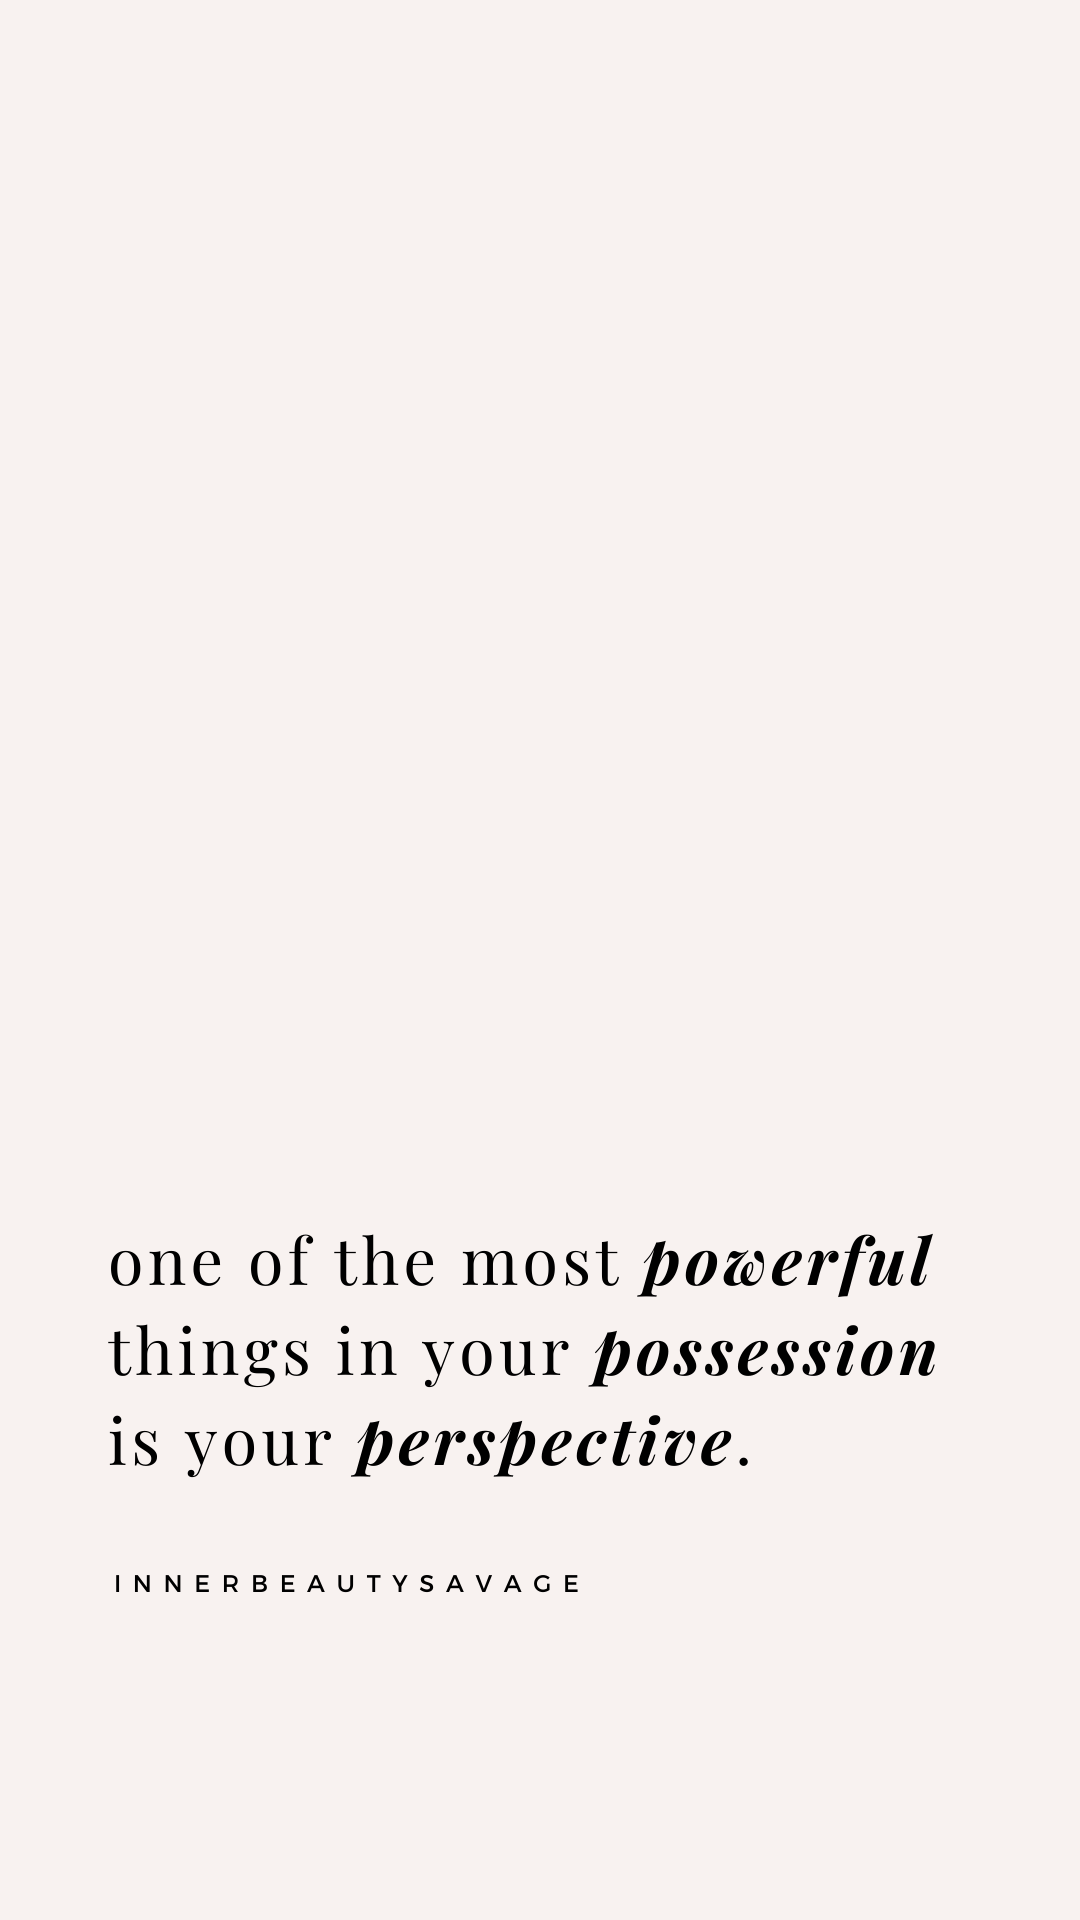 quote on perception
